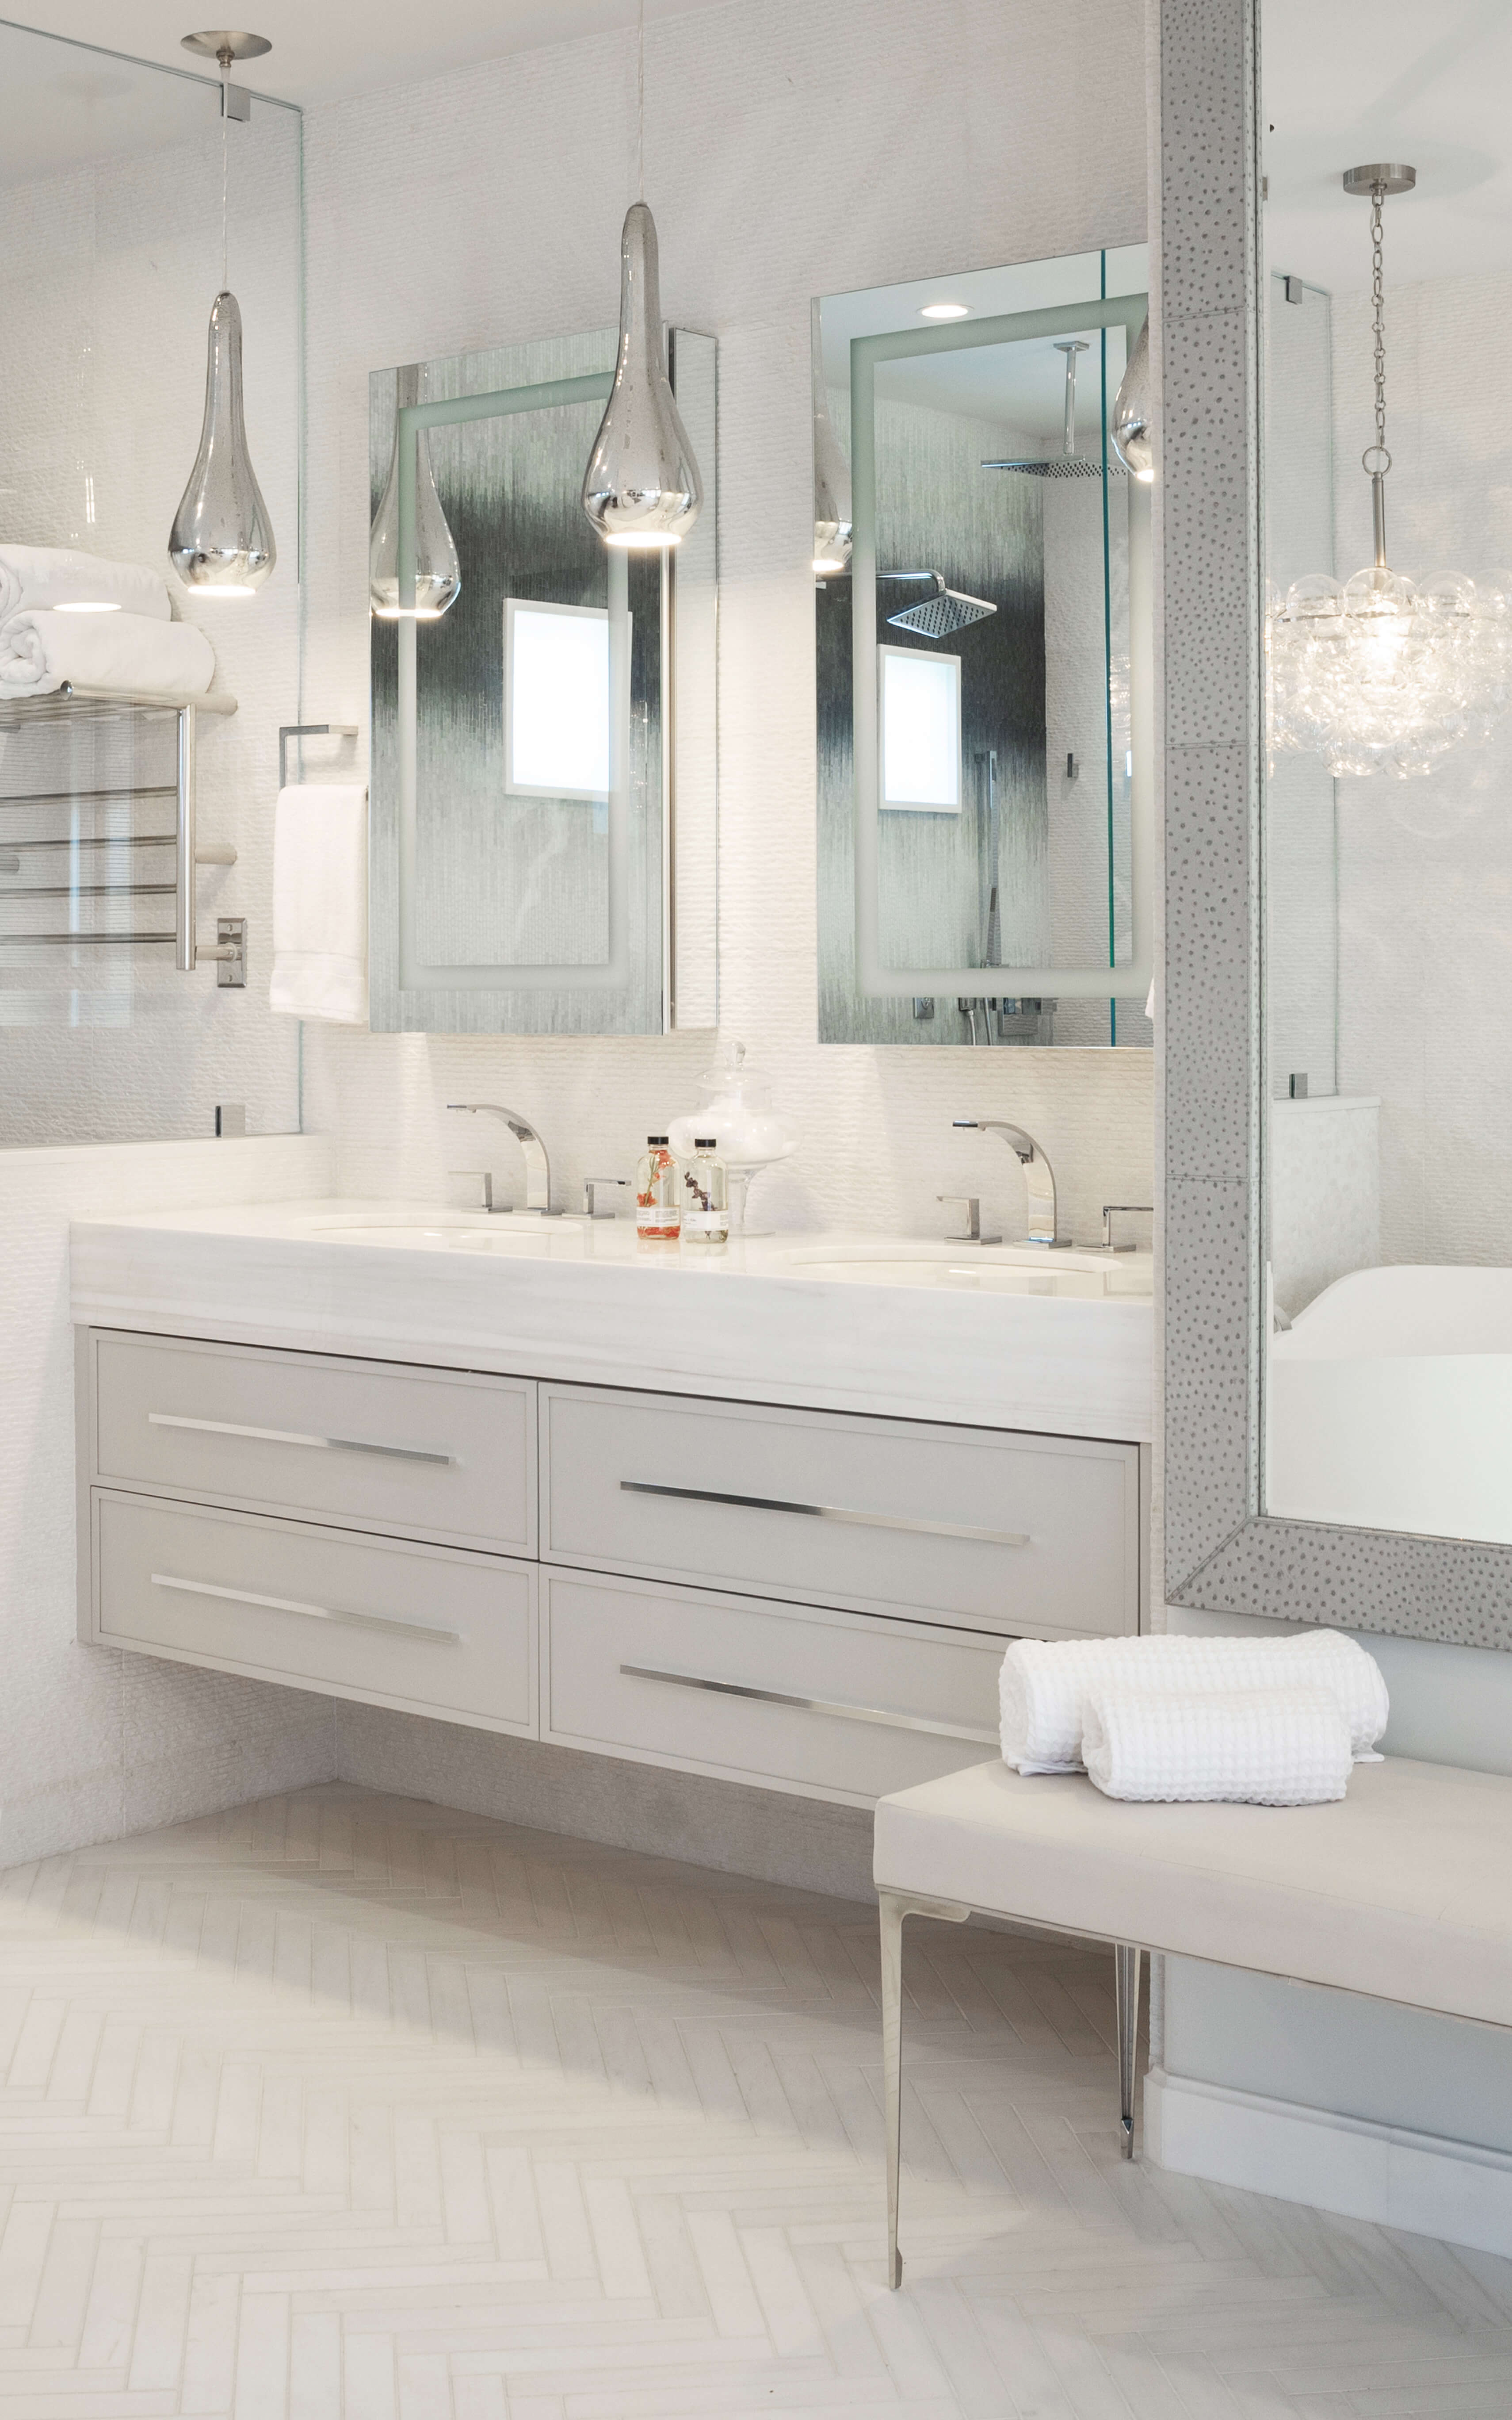 A glamorous master bathroom suite with a floating vanity with very thin profiles on the flat panel door. The wall hug vanity is shown with a soft, light gray painted finish, long satin nickel hardware pulls, and a thick quartz countertop.